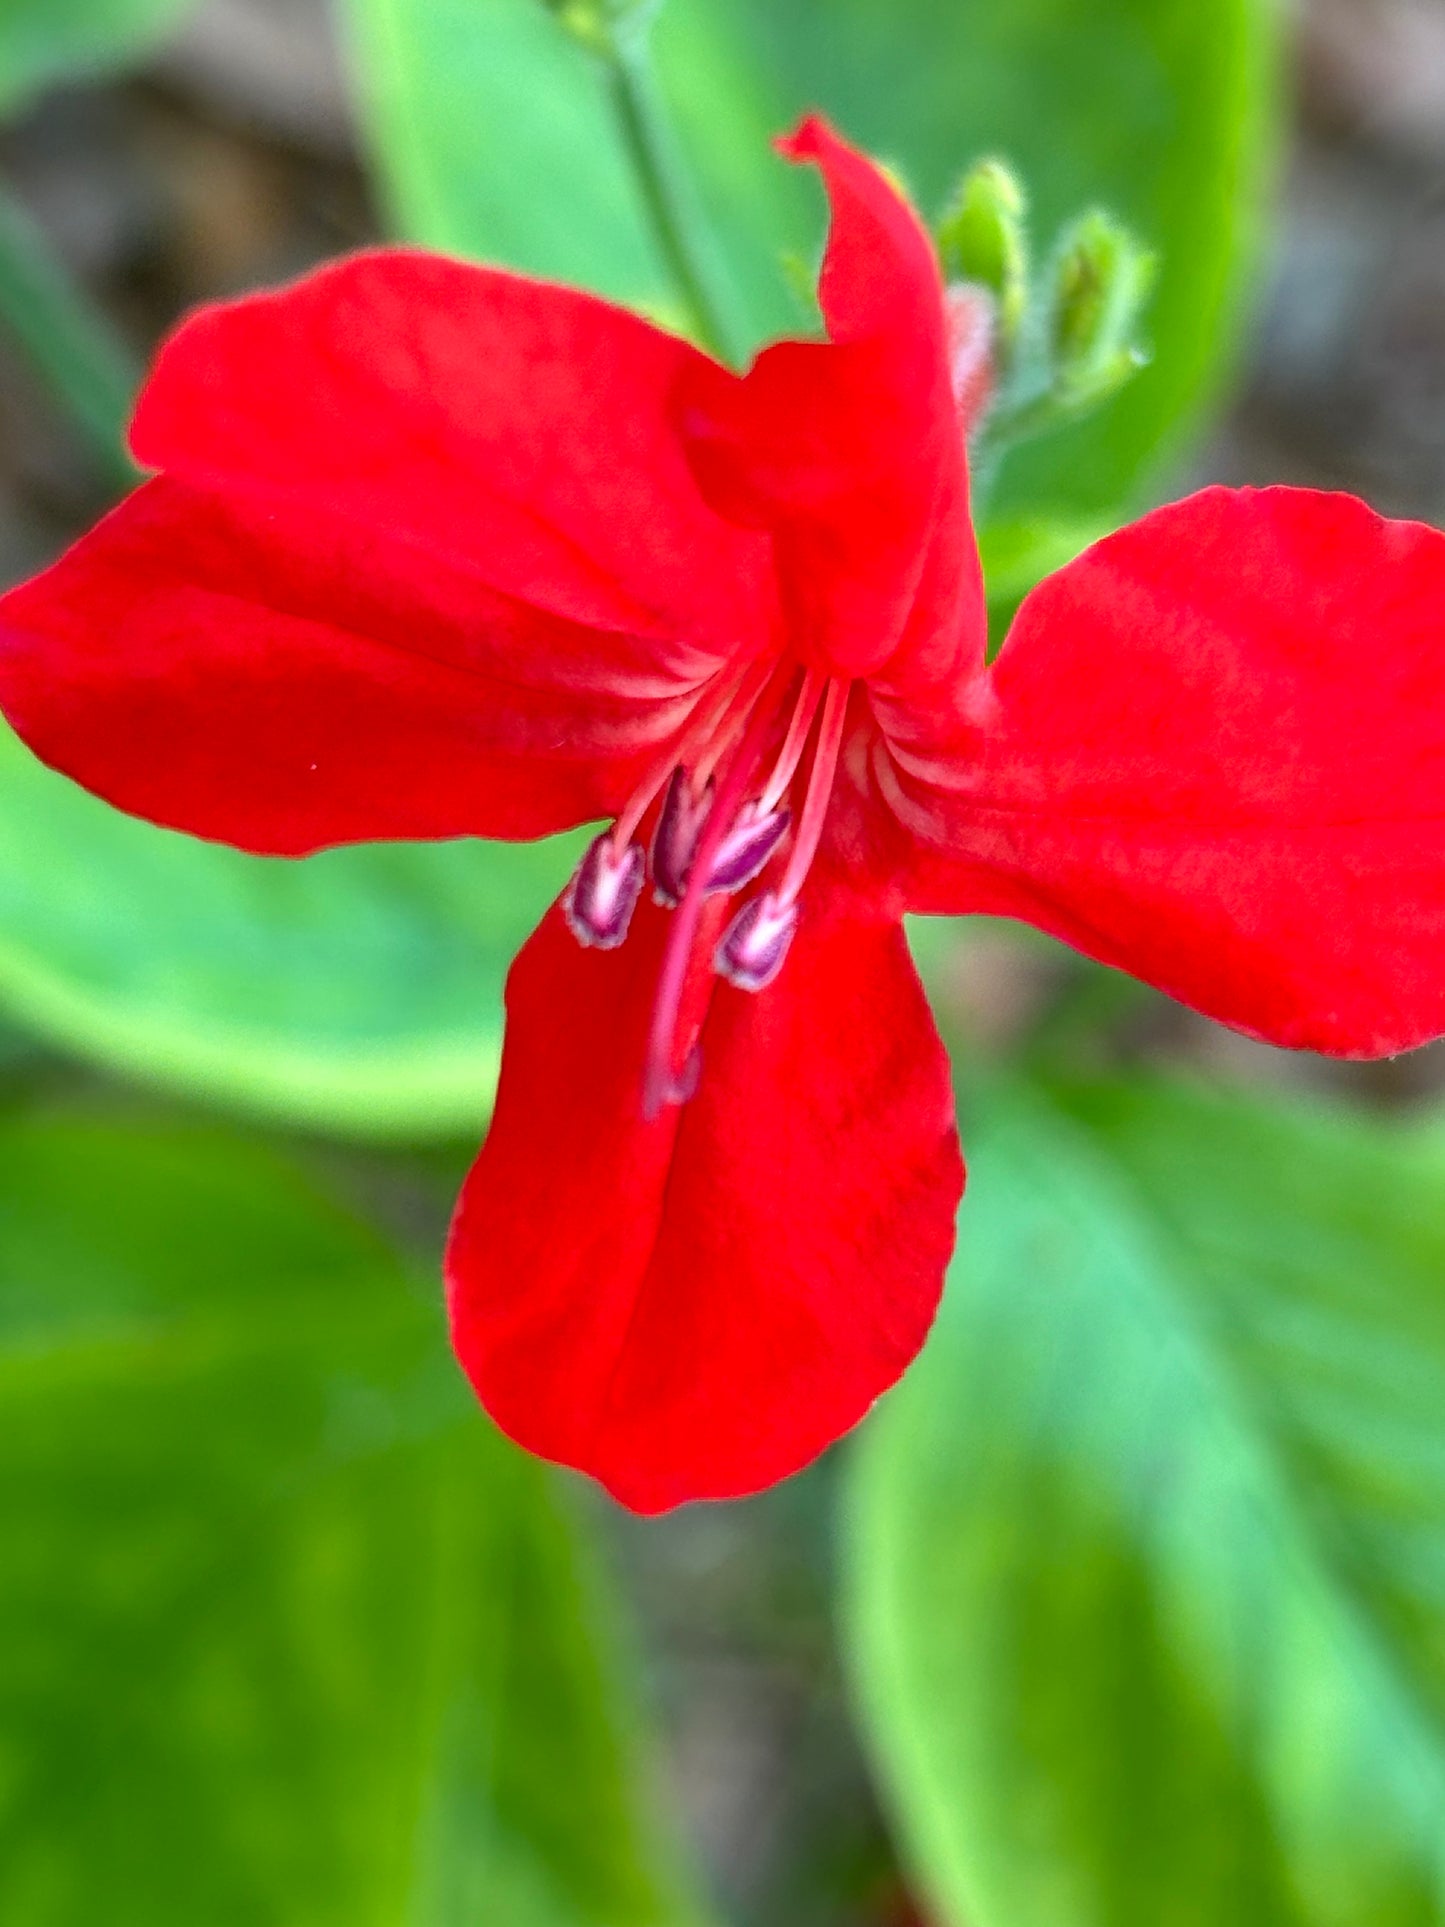 ruglia coccinea with a red flower is the host plant for malachite butterfly